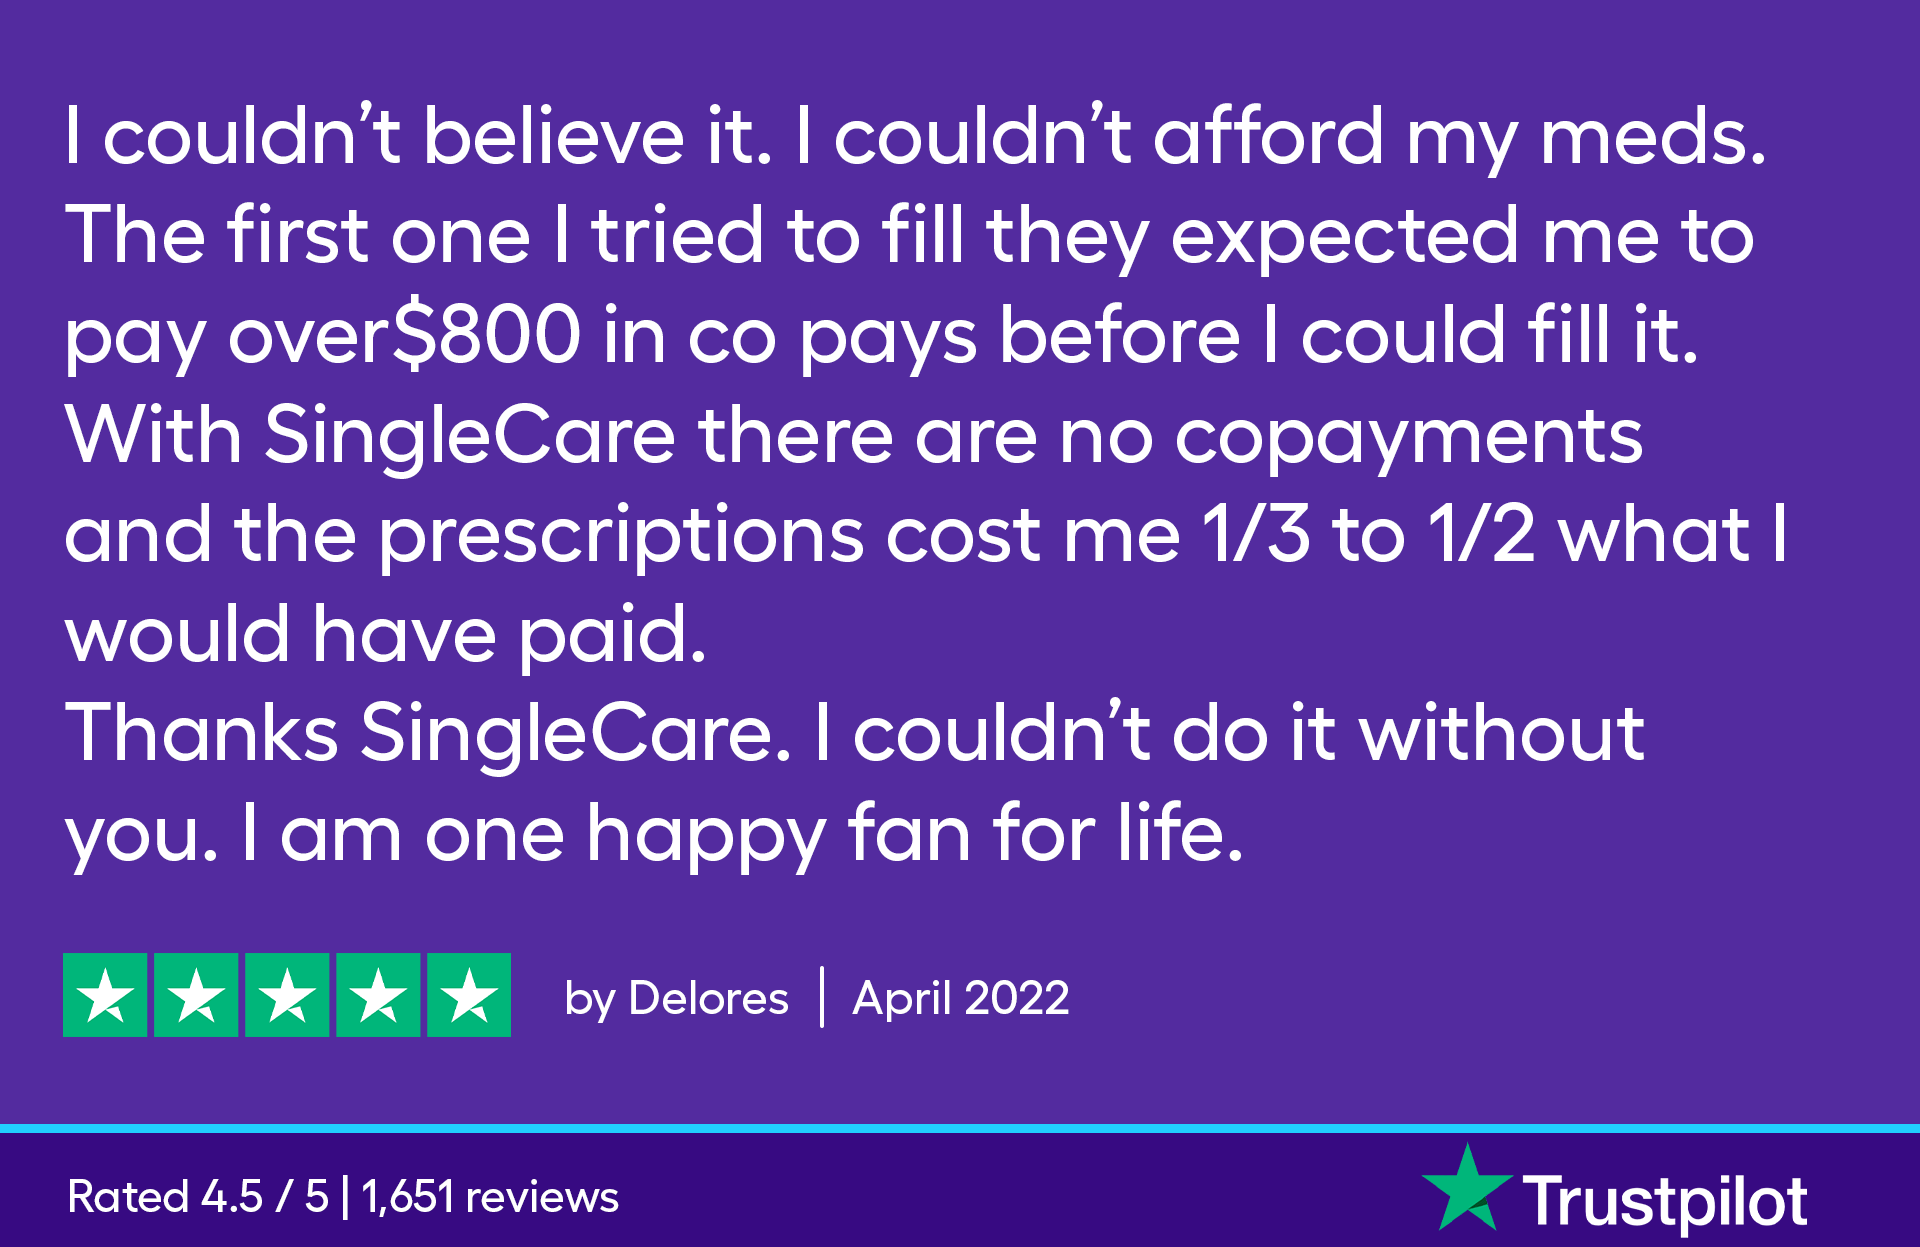 I couldn’t believe it. I couldn’t afford my meds. The first one I tried to fill they expected me to pay over$800 in co pays before I could fill it. With SingleCare there are no copayments and the prescriptions cost me 1/3 to 1/2 what I would have paid. Thanks SingleCare. I couldn’t do it without you. I am one happy fan for life.